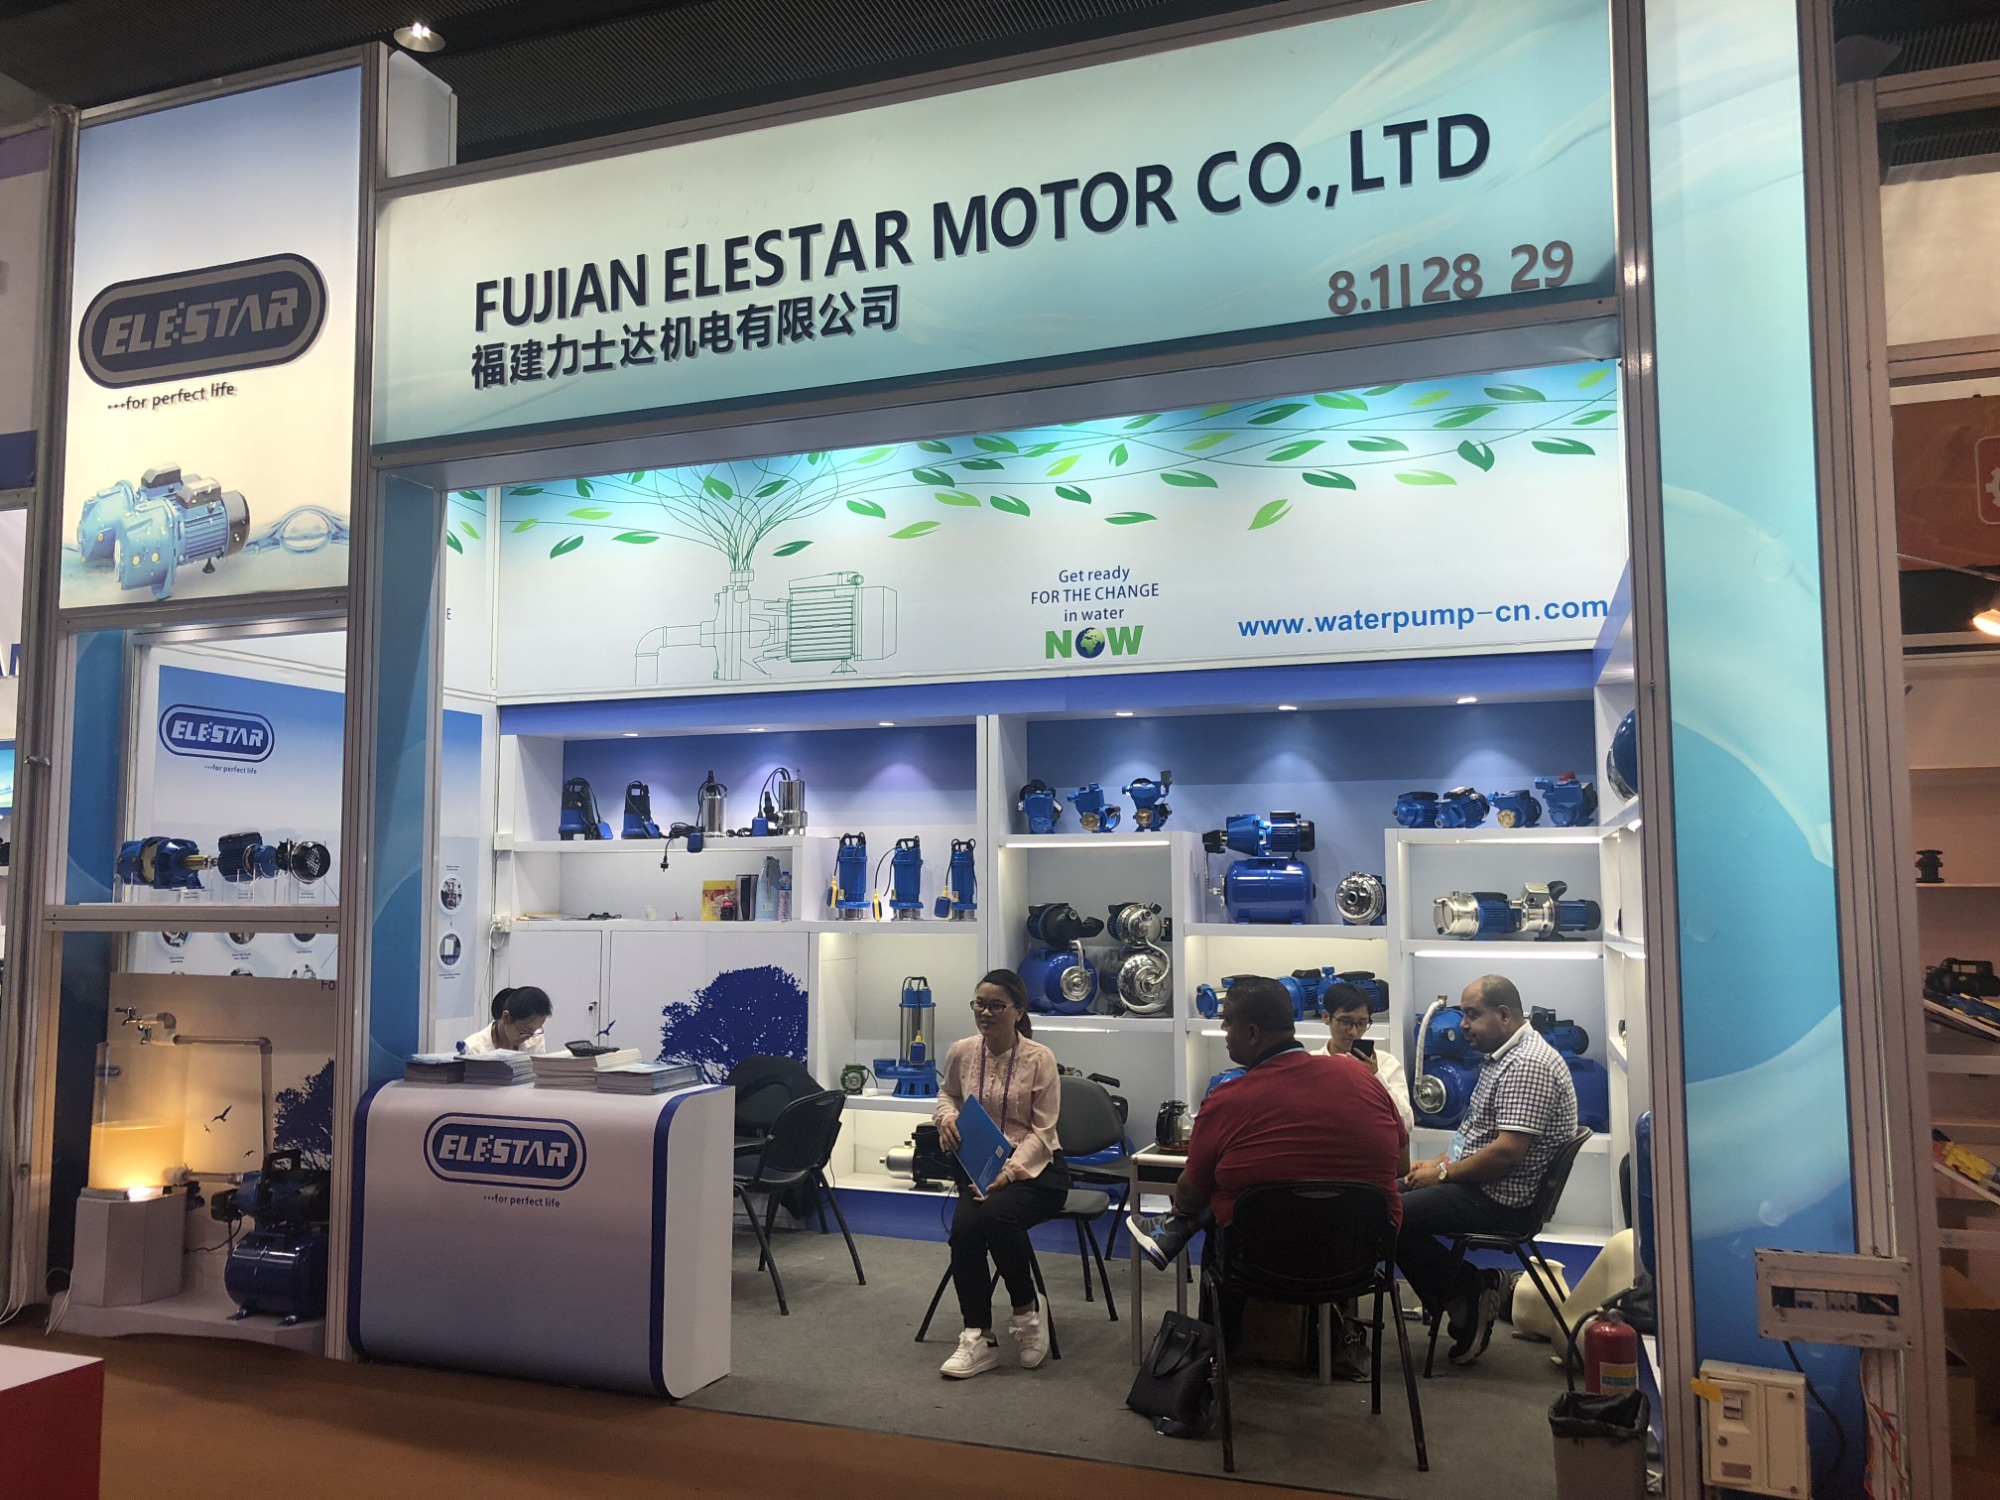 Elestar attended the 125th Canton fair, booth number 8.1|28 29